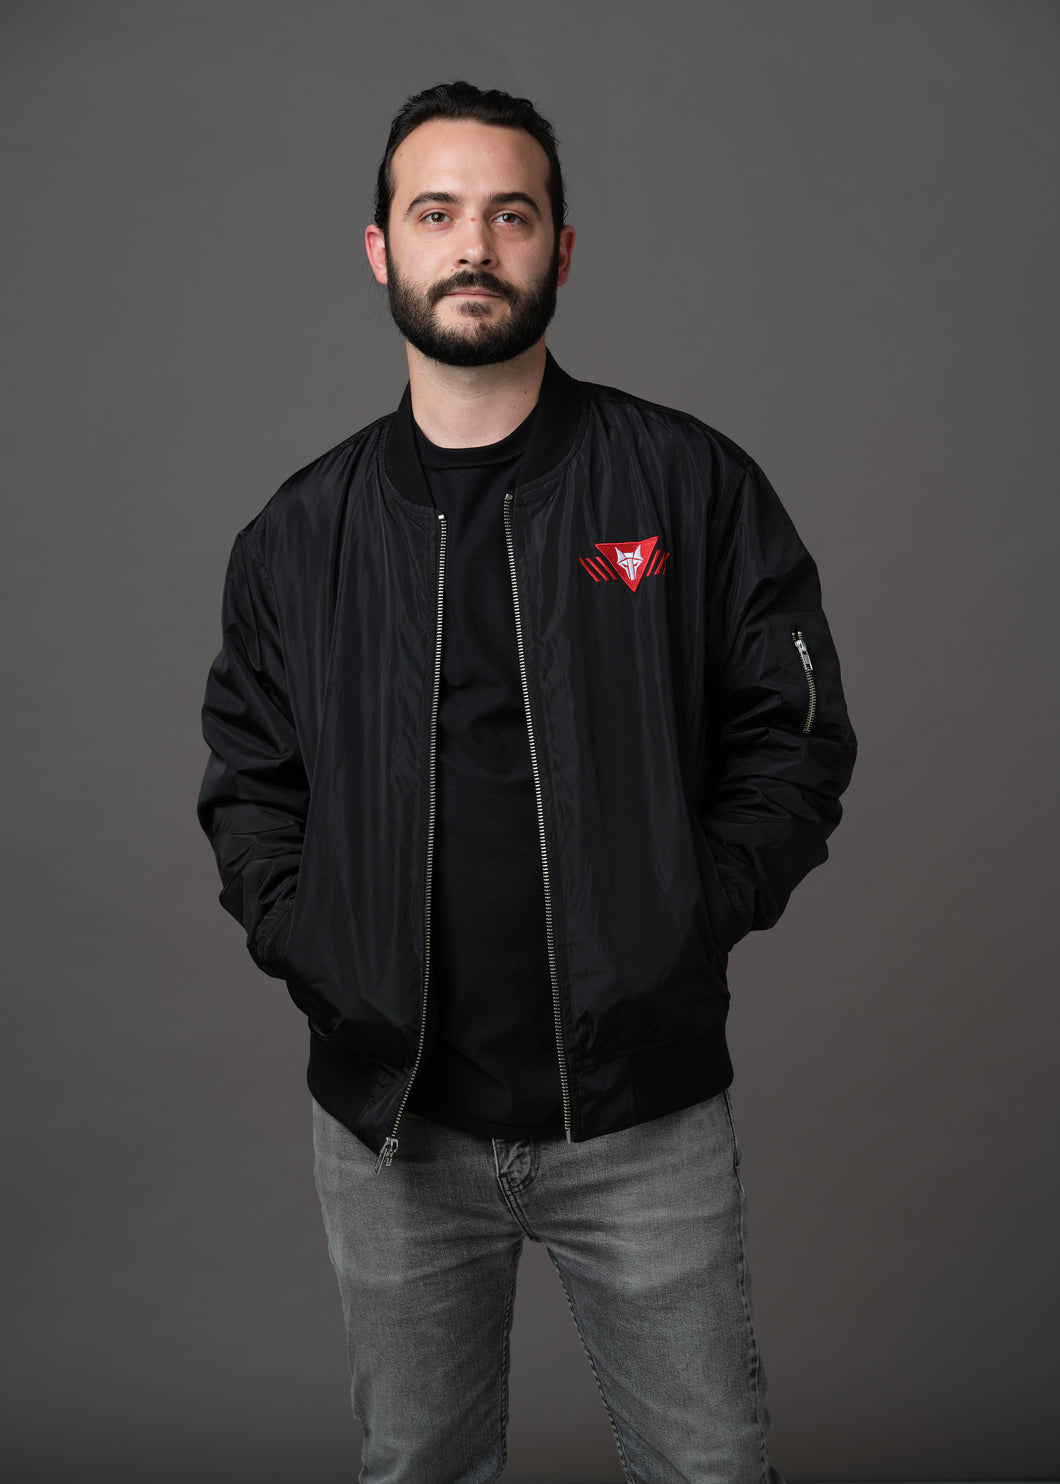 Black bomber jacket embroidered with the House Mars Wolf Sigil on the front right and Pegasus Legion Sigil on back